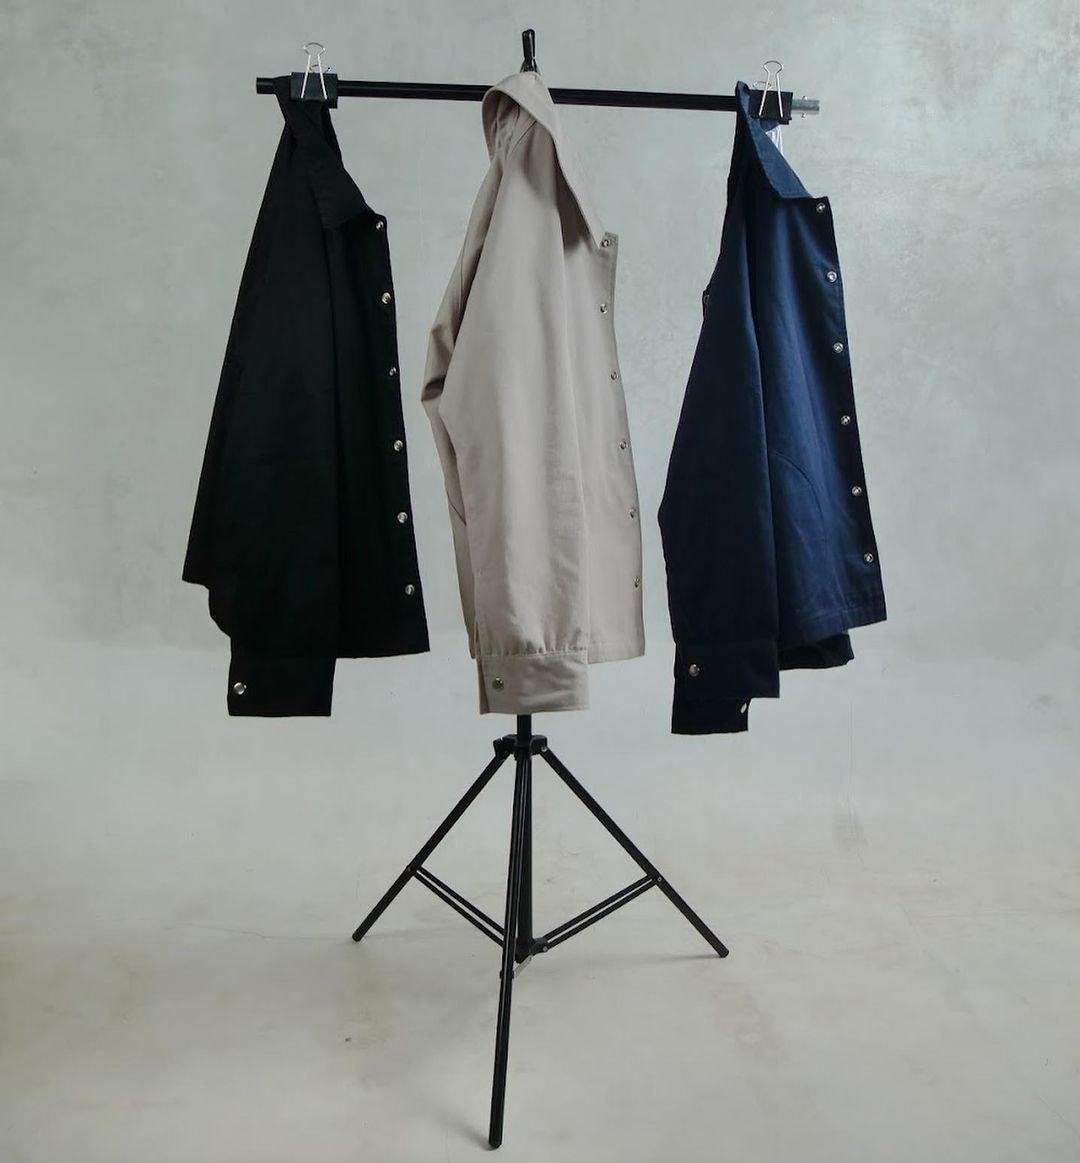 Three men's jackets in different colors hanging on a standing clothes hanger